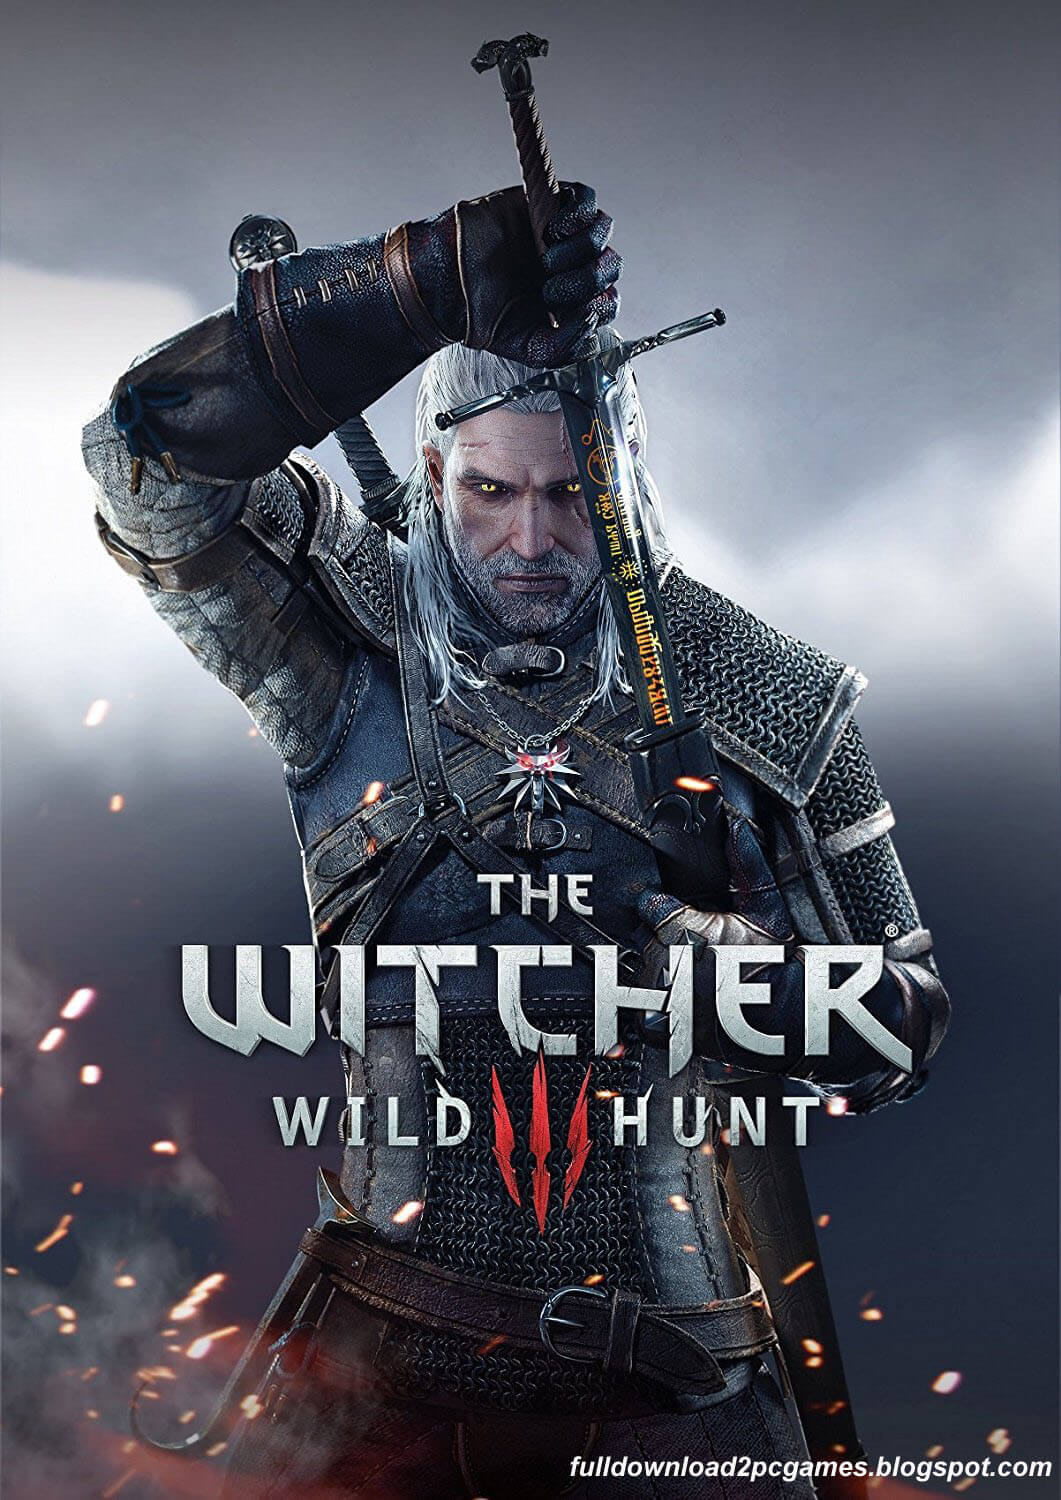 The Witcher 3 Wild Hunt Free Download PC Game - Full Version Games Free ...